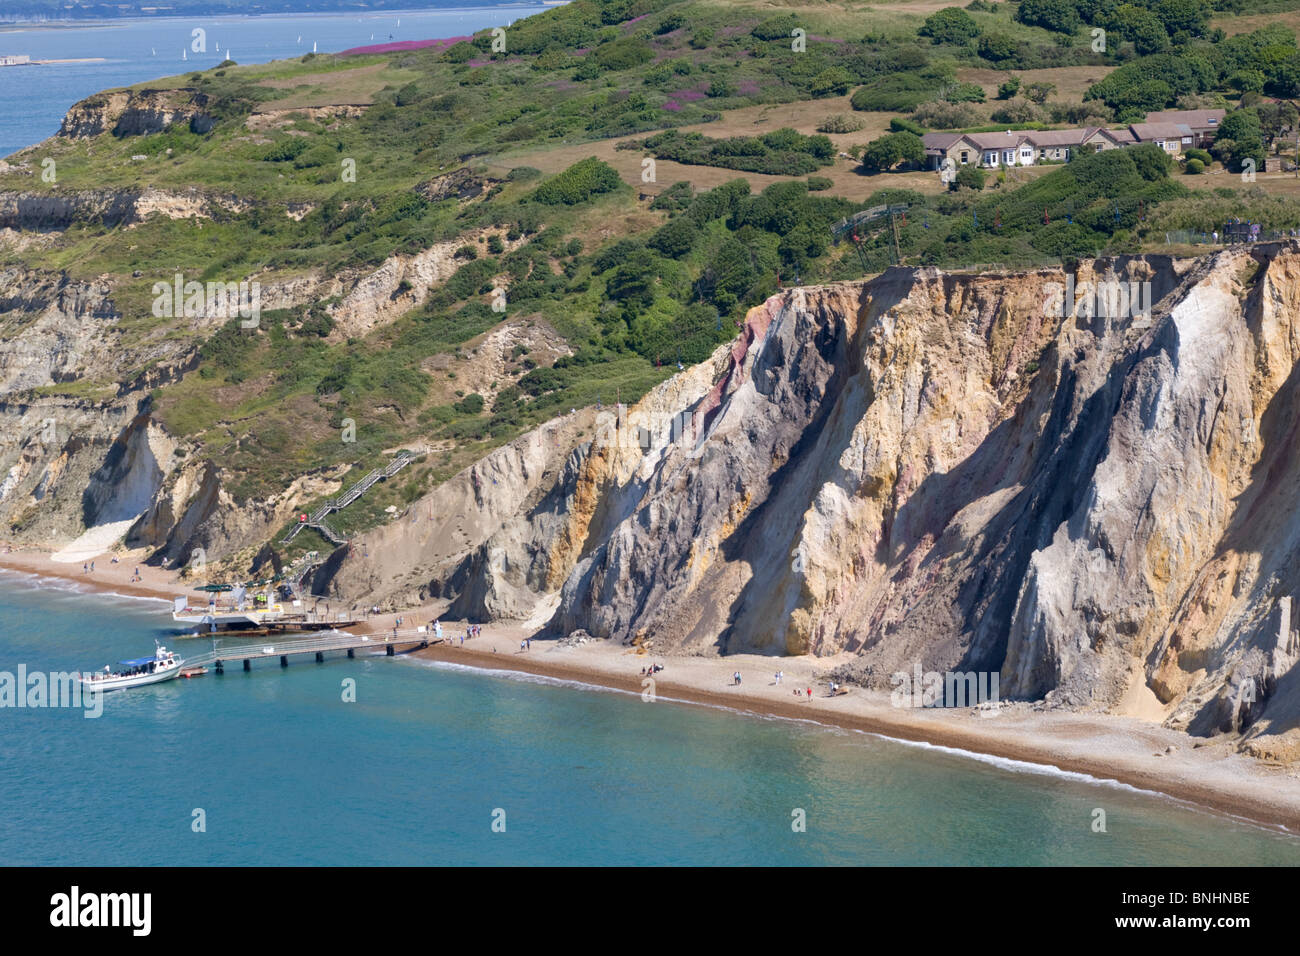 Alum Bay beach famous for its multi-coloured sand cliffs, Isle of Wight Stock Photo